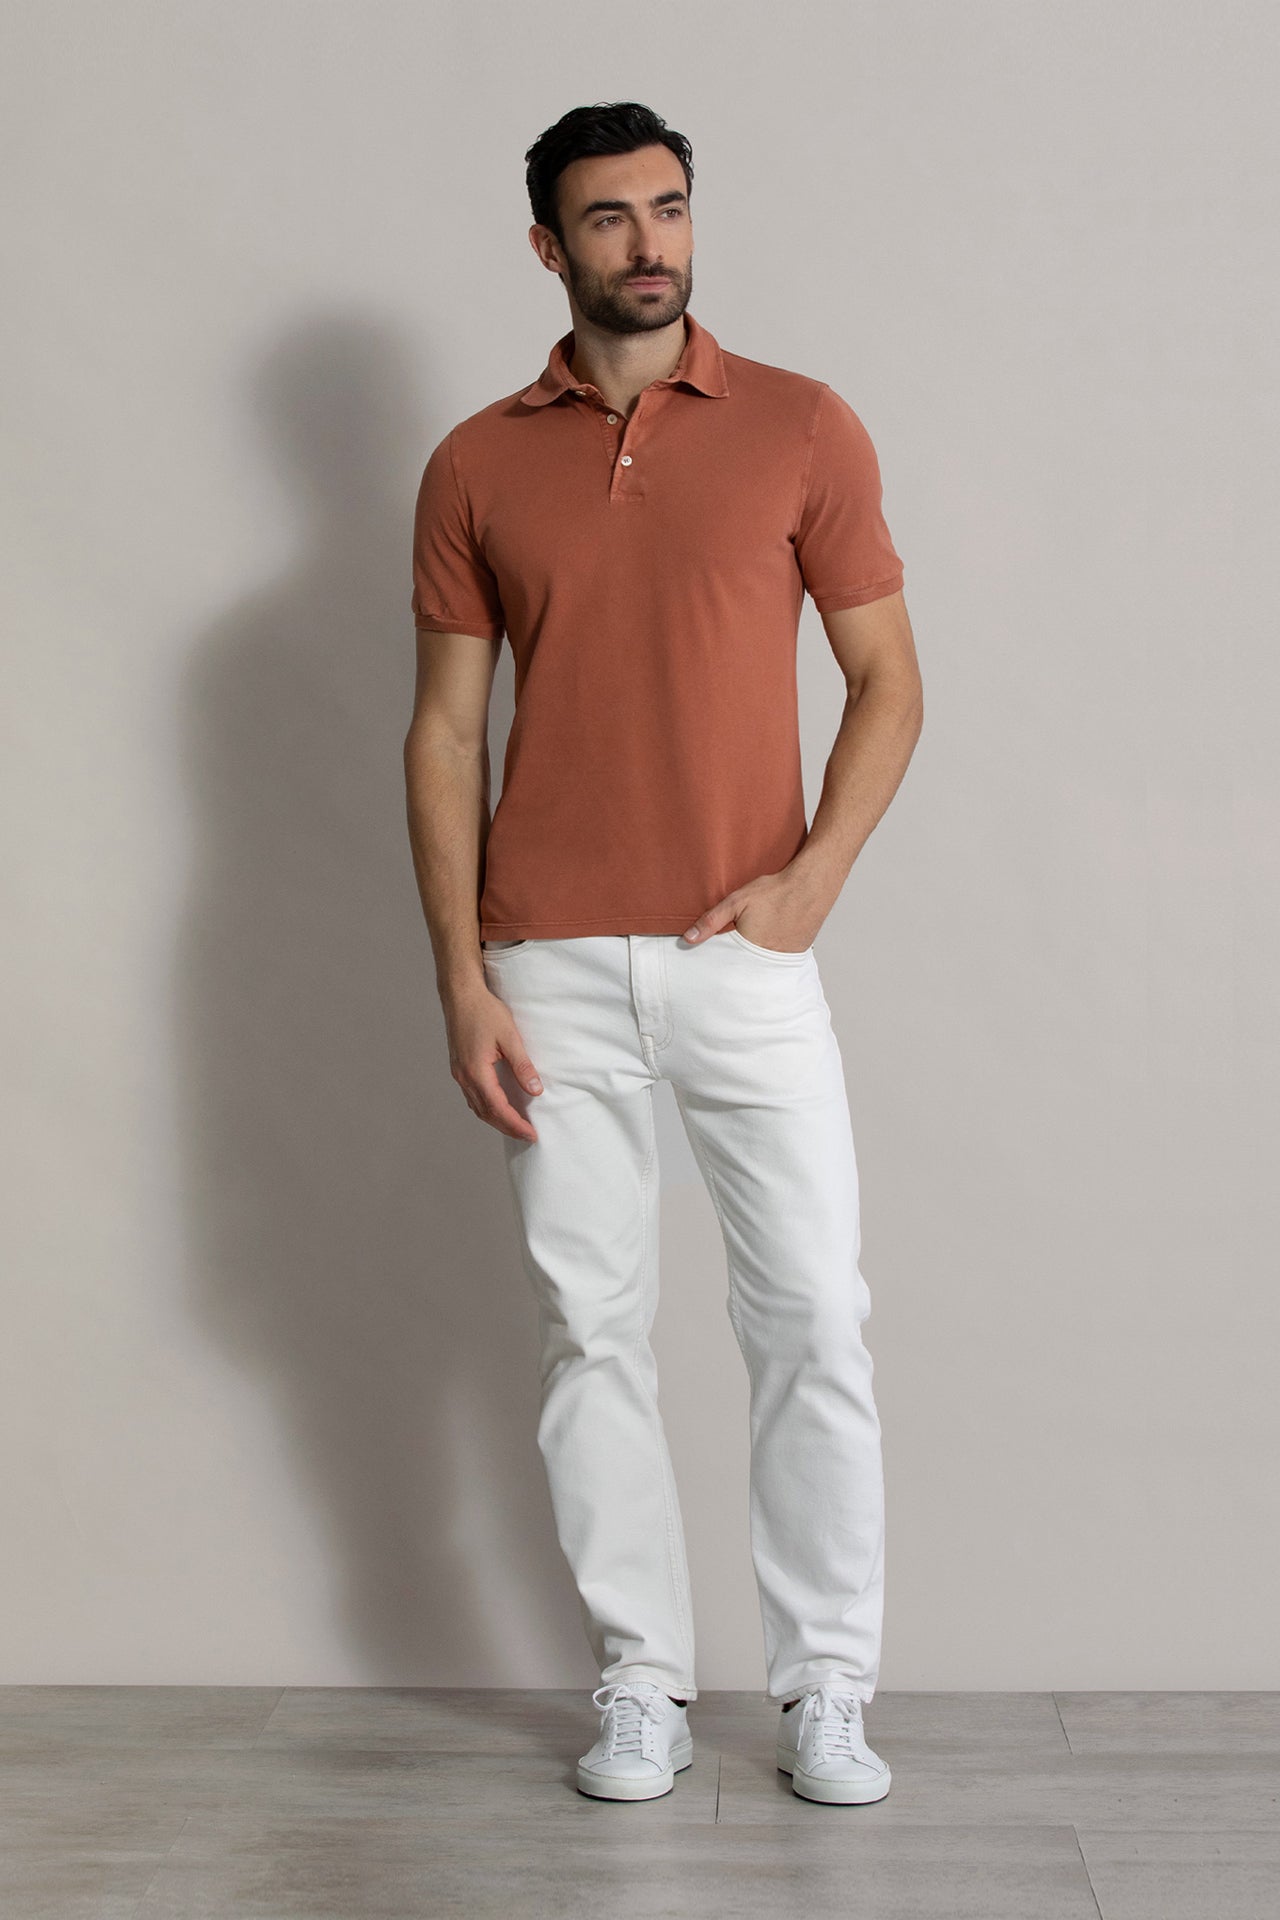 Model with North short sleeves cotton polo in orange